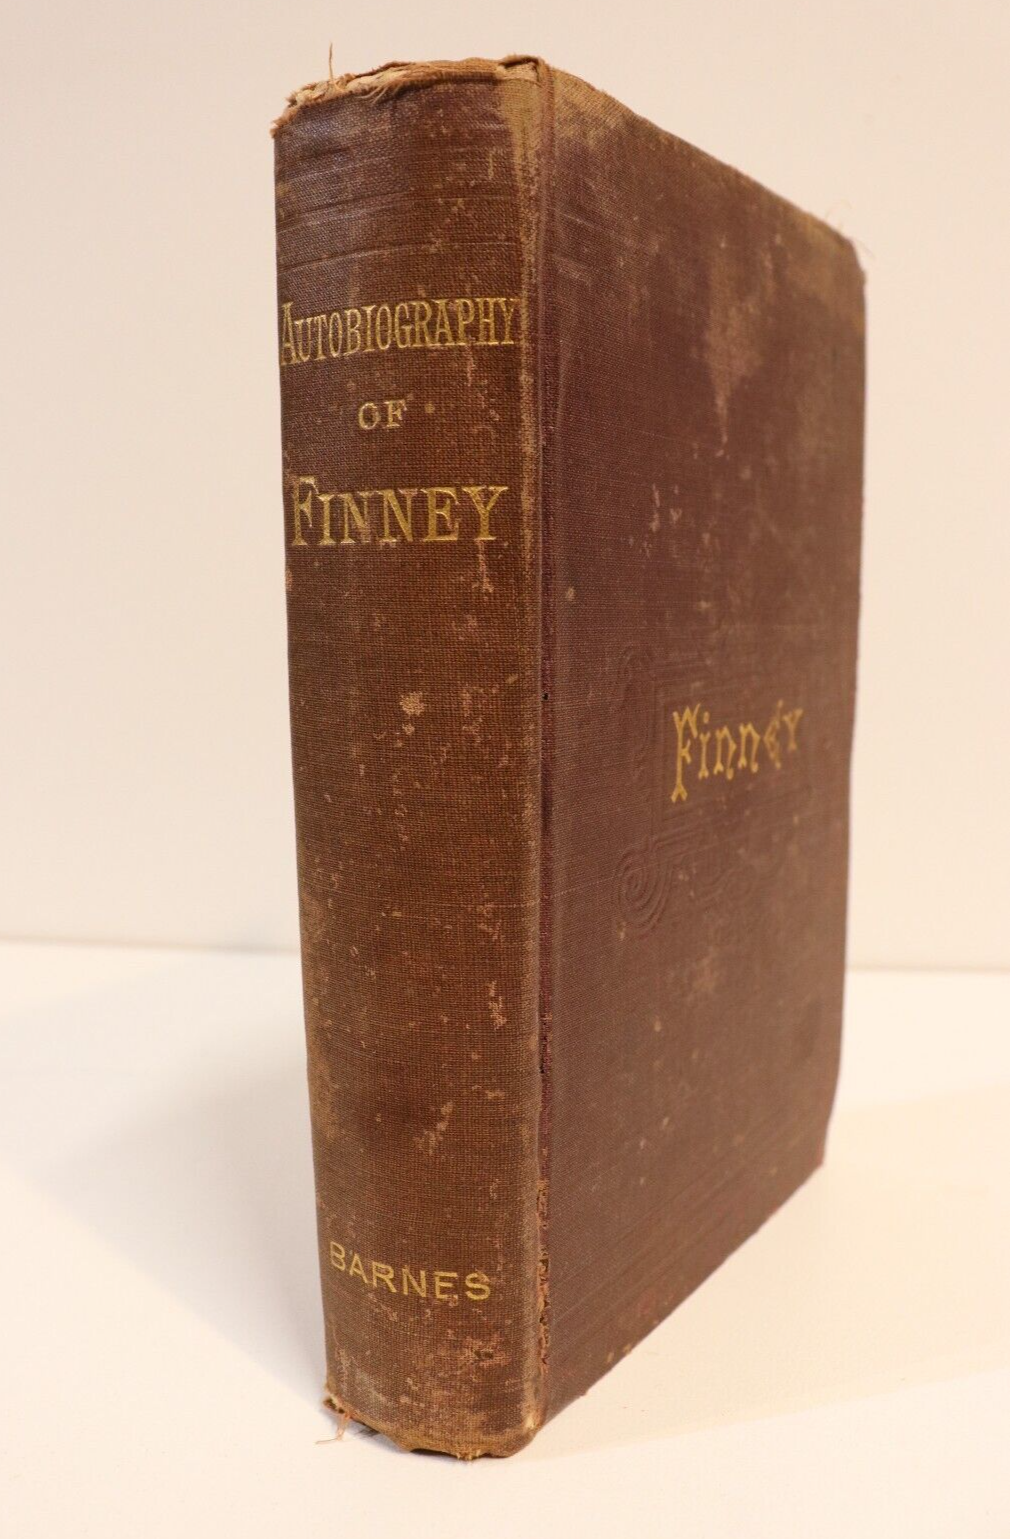 Memoirs Of Charles G. Finney - 1876 - 1st Edition Antique American History Book